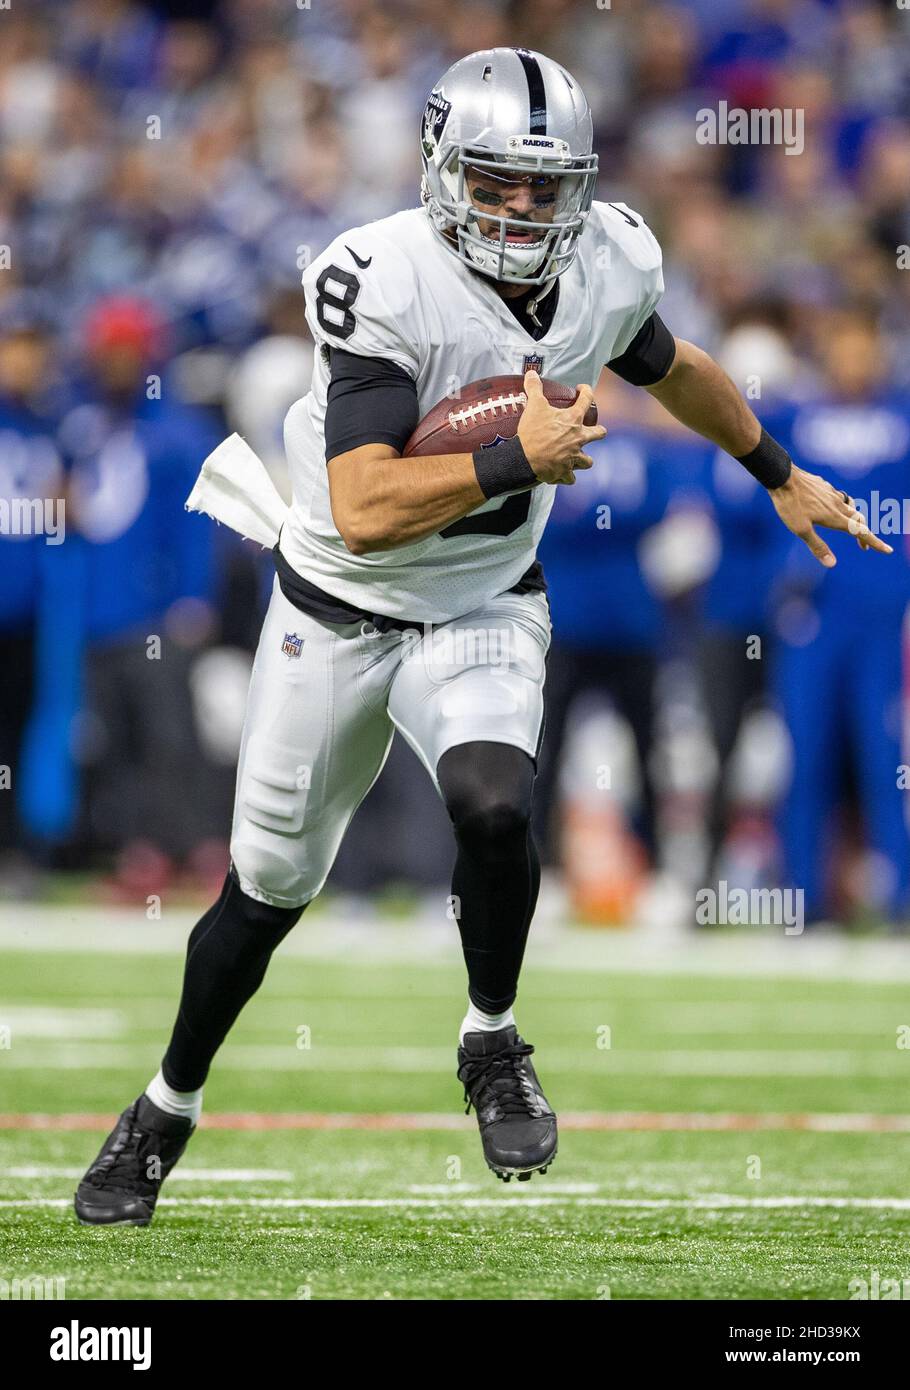 January 02, 2022: Las Vegas Raiders quarterback Marcus Mariota (8) runs  with the ball during NFL football game action between the Las Vegas Raiders  and the Indianapolis Colts at Lucas Oil Stadium